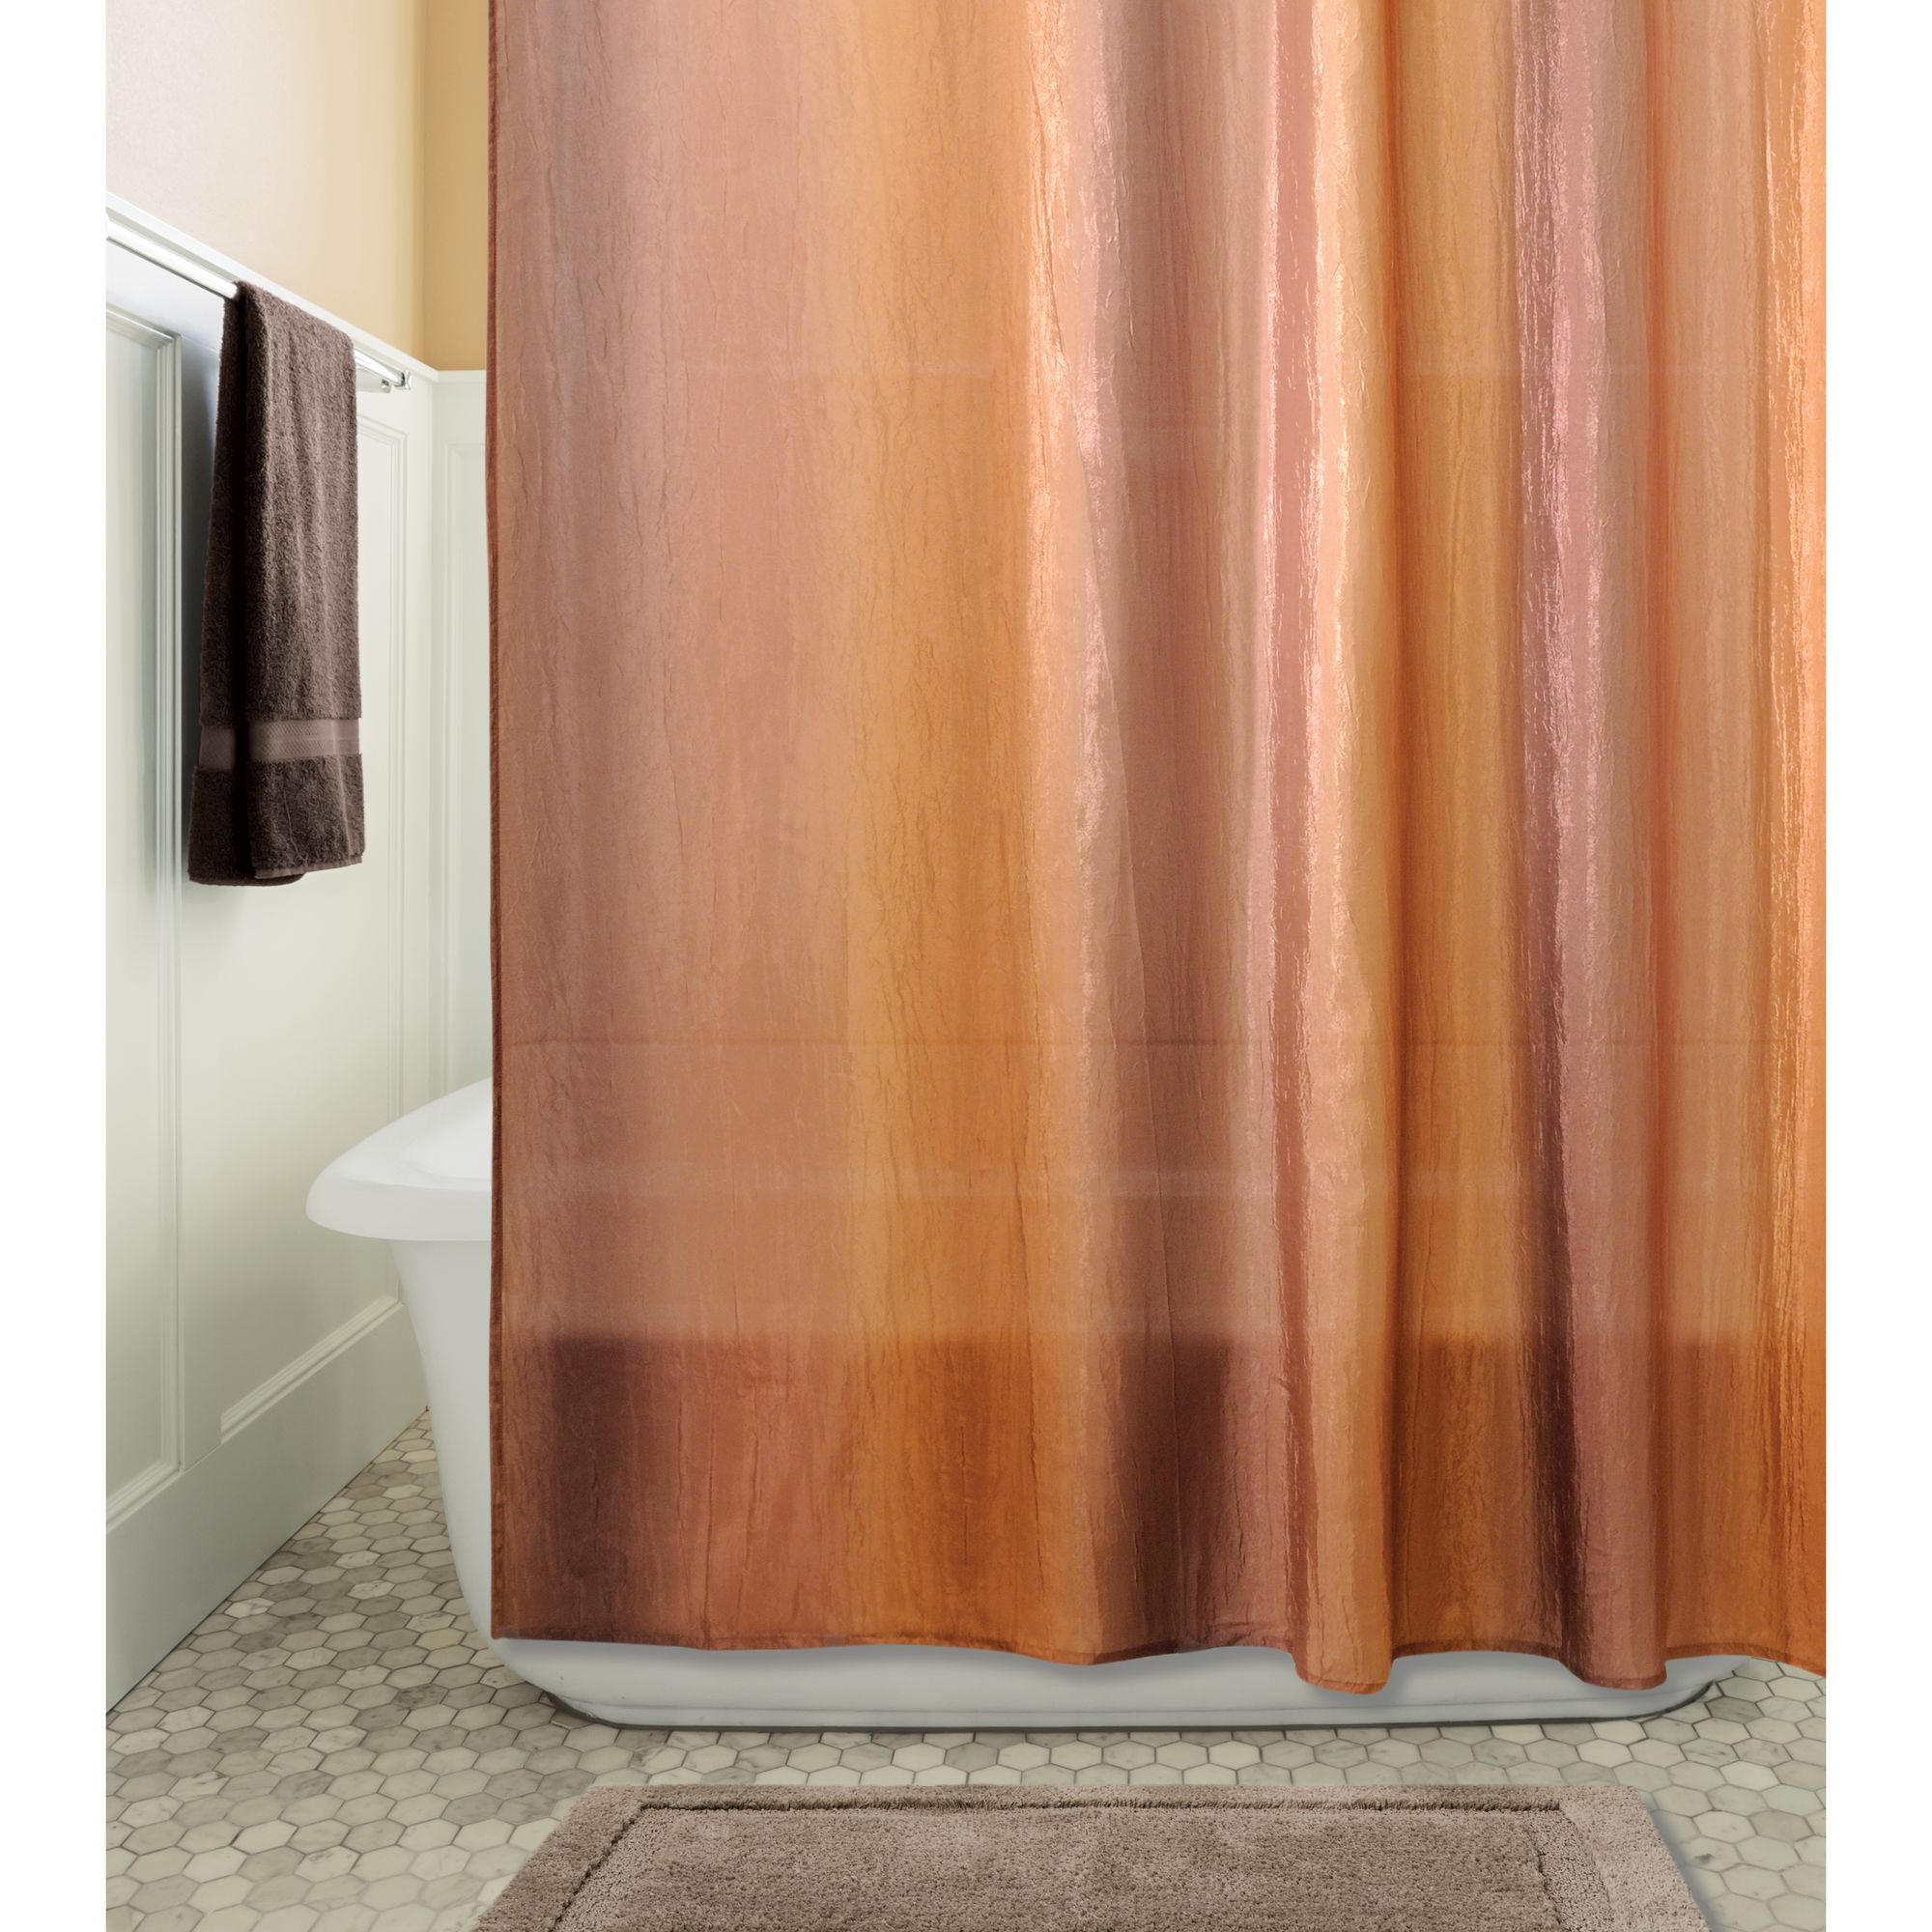 InterDesign Ombre Fabric Shower Curtain, Standard 72" x 72", Brown/Gold - image 3 of 4